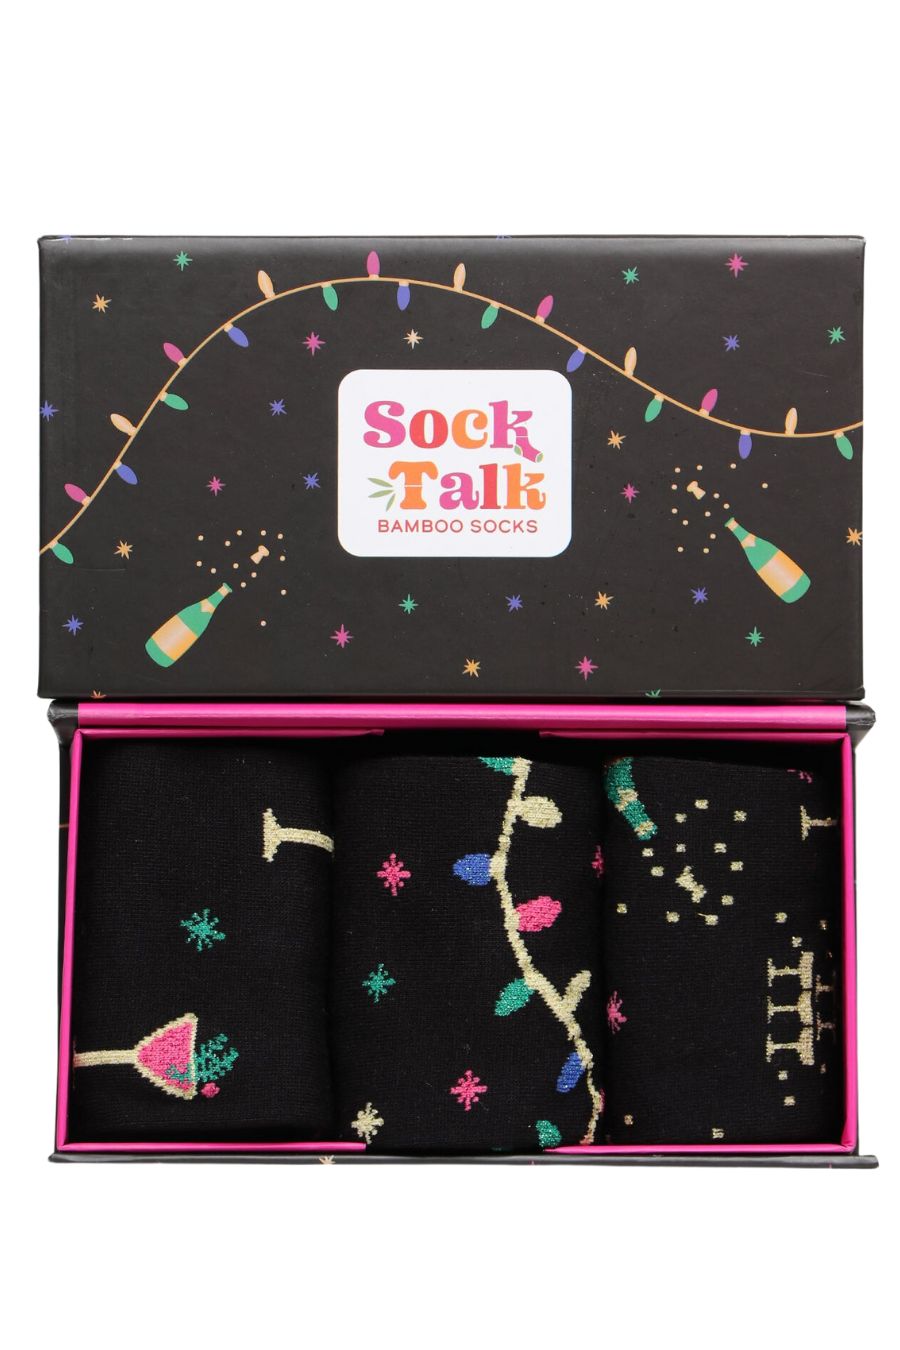 black and multicoloured gift box designed to look like a party with champagne bottiles, lights and stars, with three pairs of ankle socks